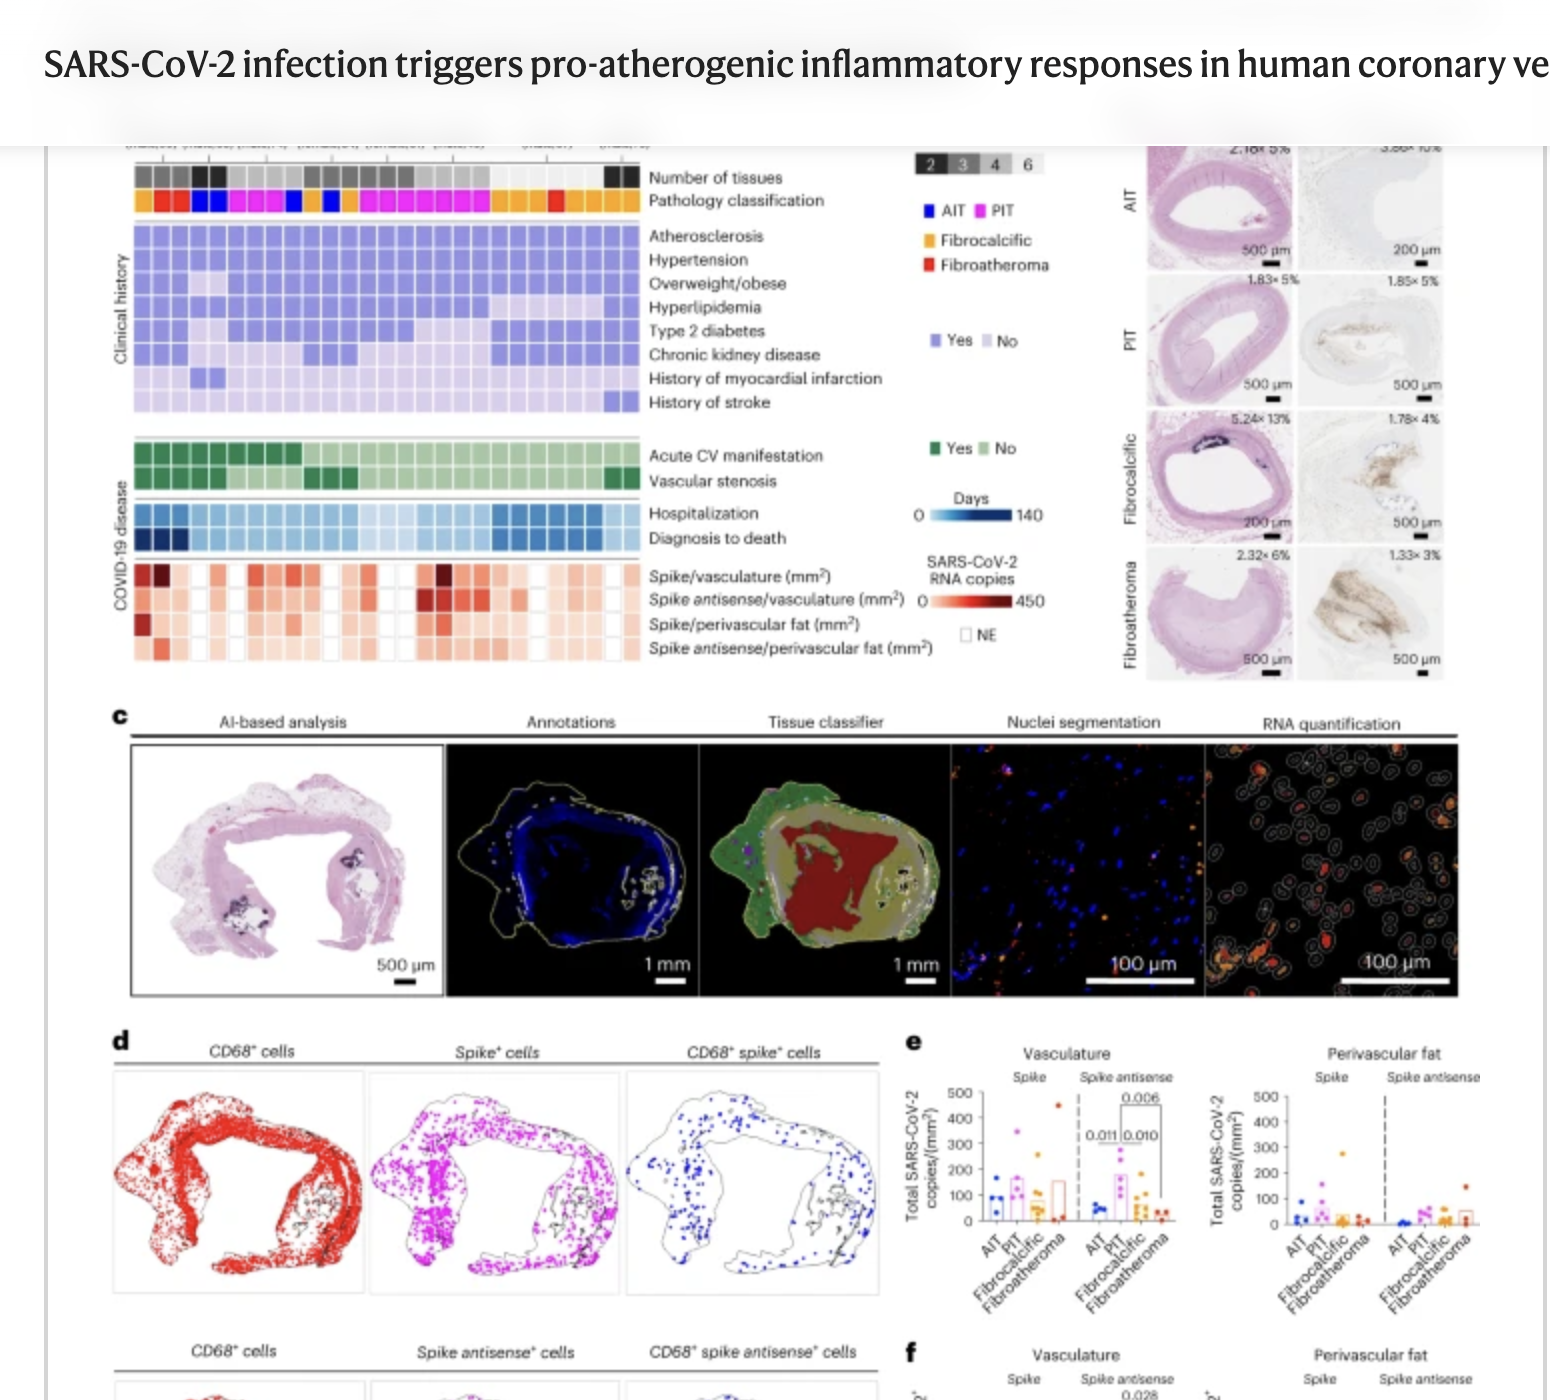 SARS-CoV-2 vRNA in human coronary arteries from deceased individuals with COVID-19 is identified using AI-based spatial analysis.